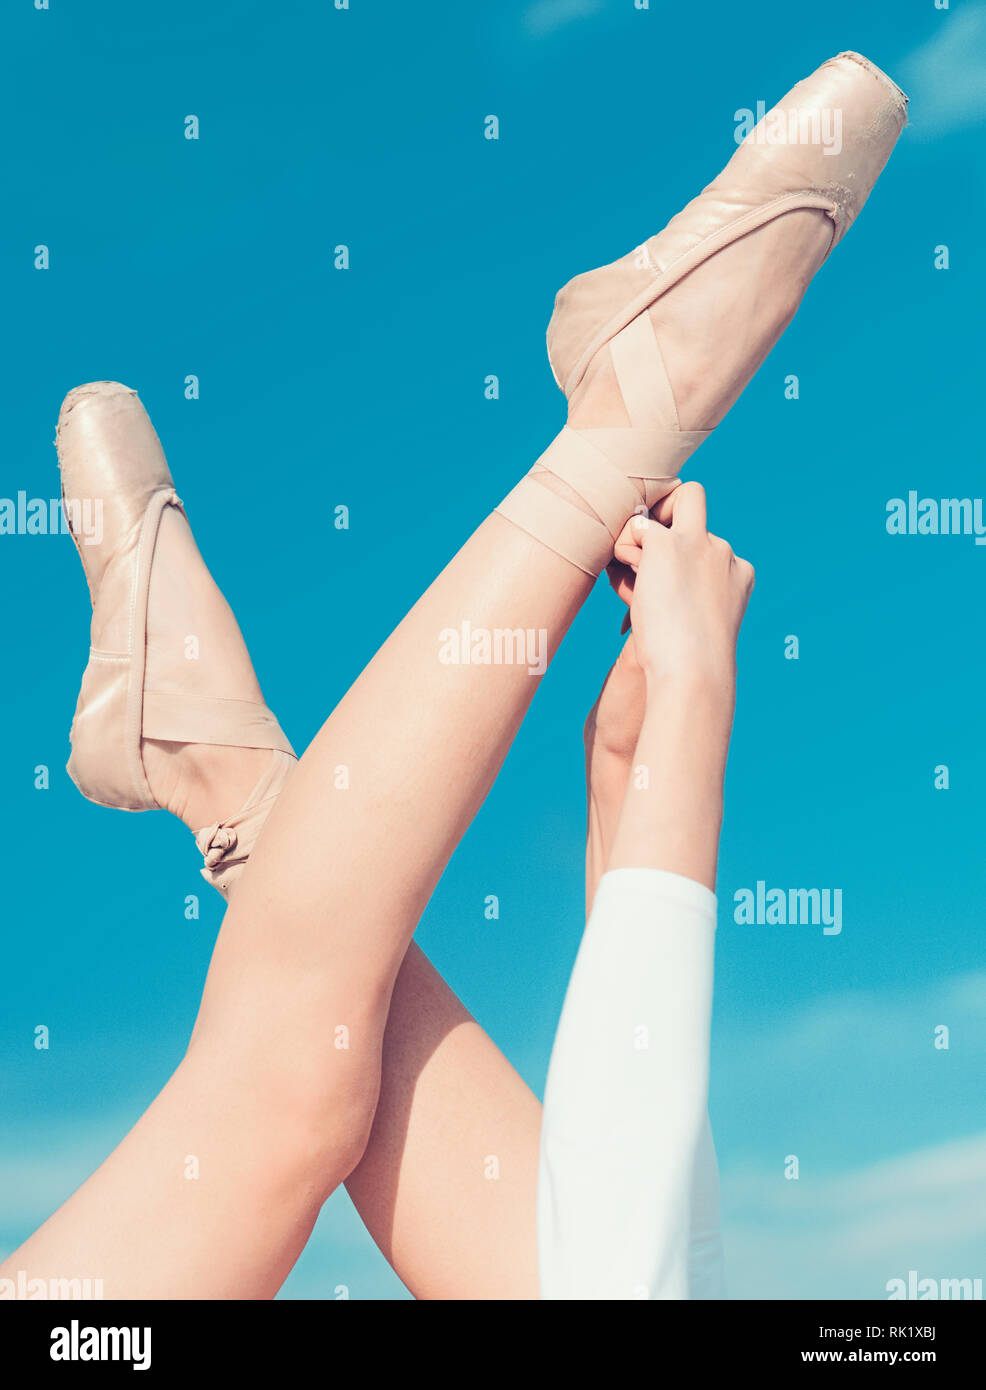 Touching the sky. Pointe shoes worn by ballet dancer. Ballet slippers. Ballerina shoes. Ballerina legs in ballet shoes. Female feet in pointe shoes Stock Photo